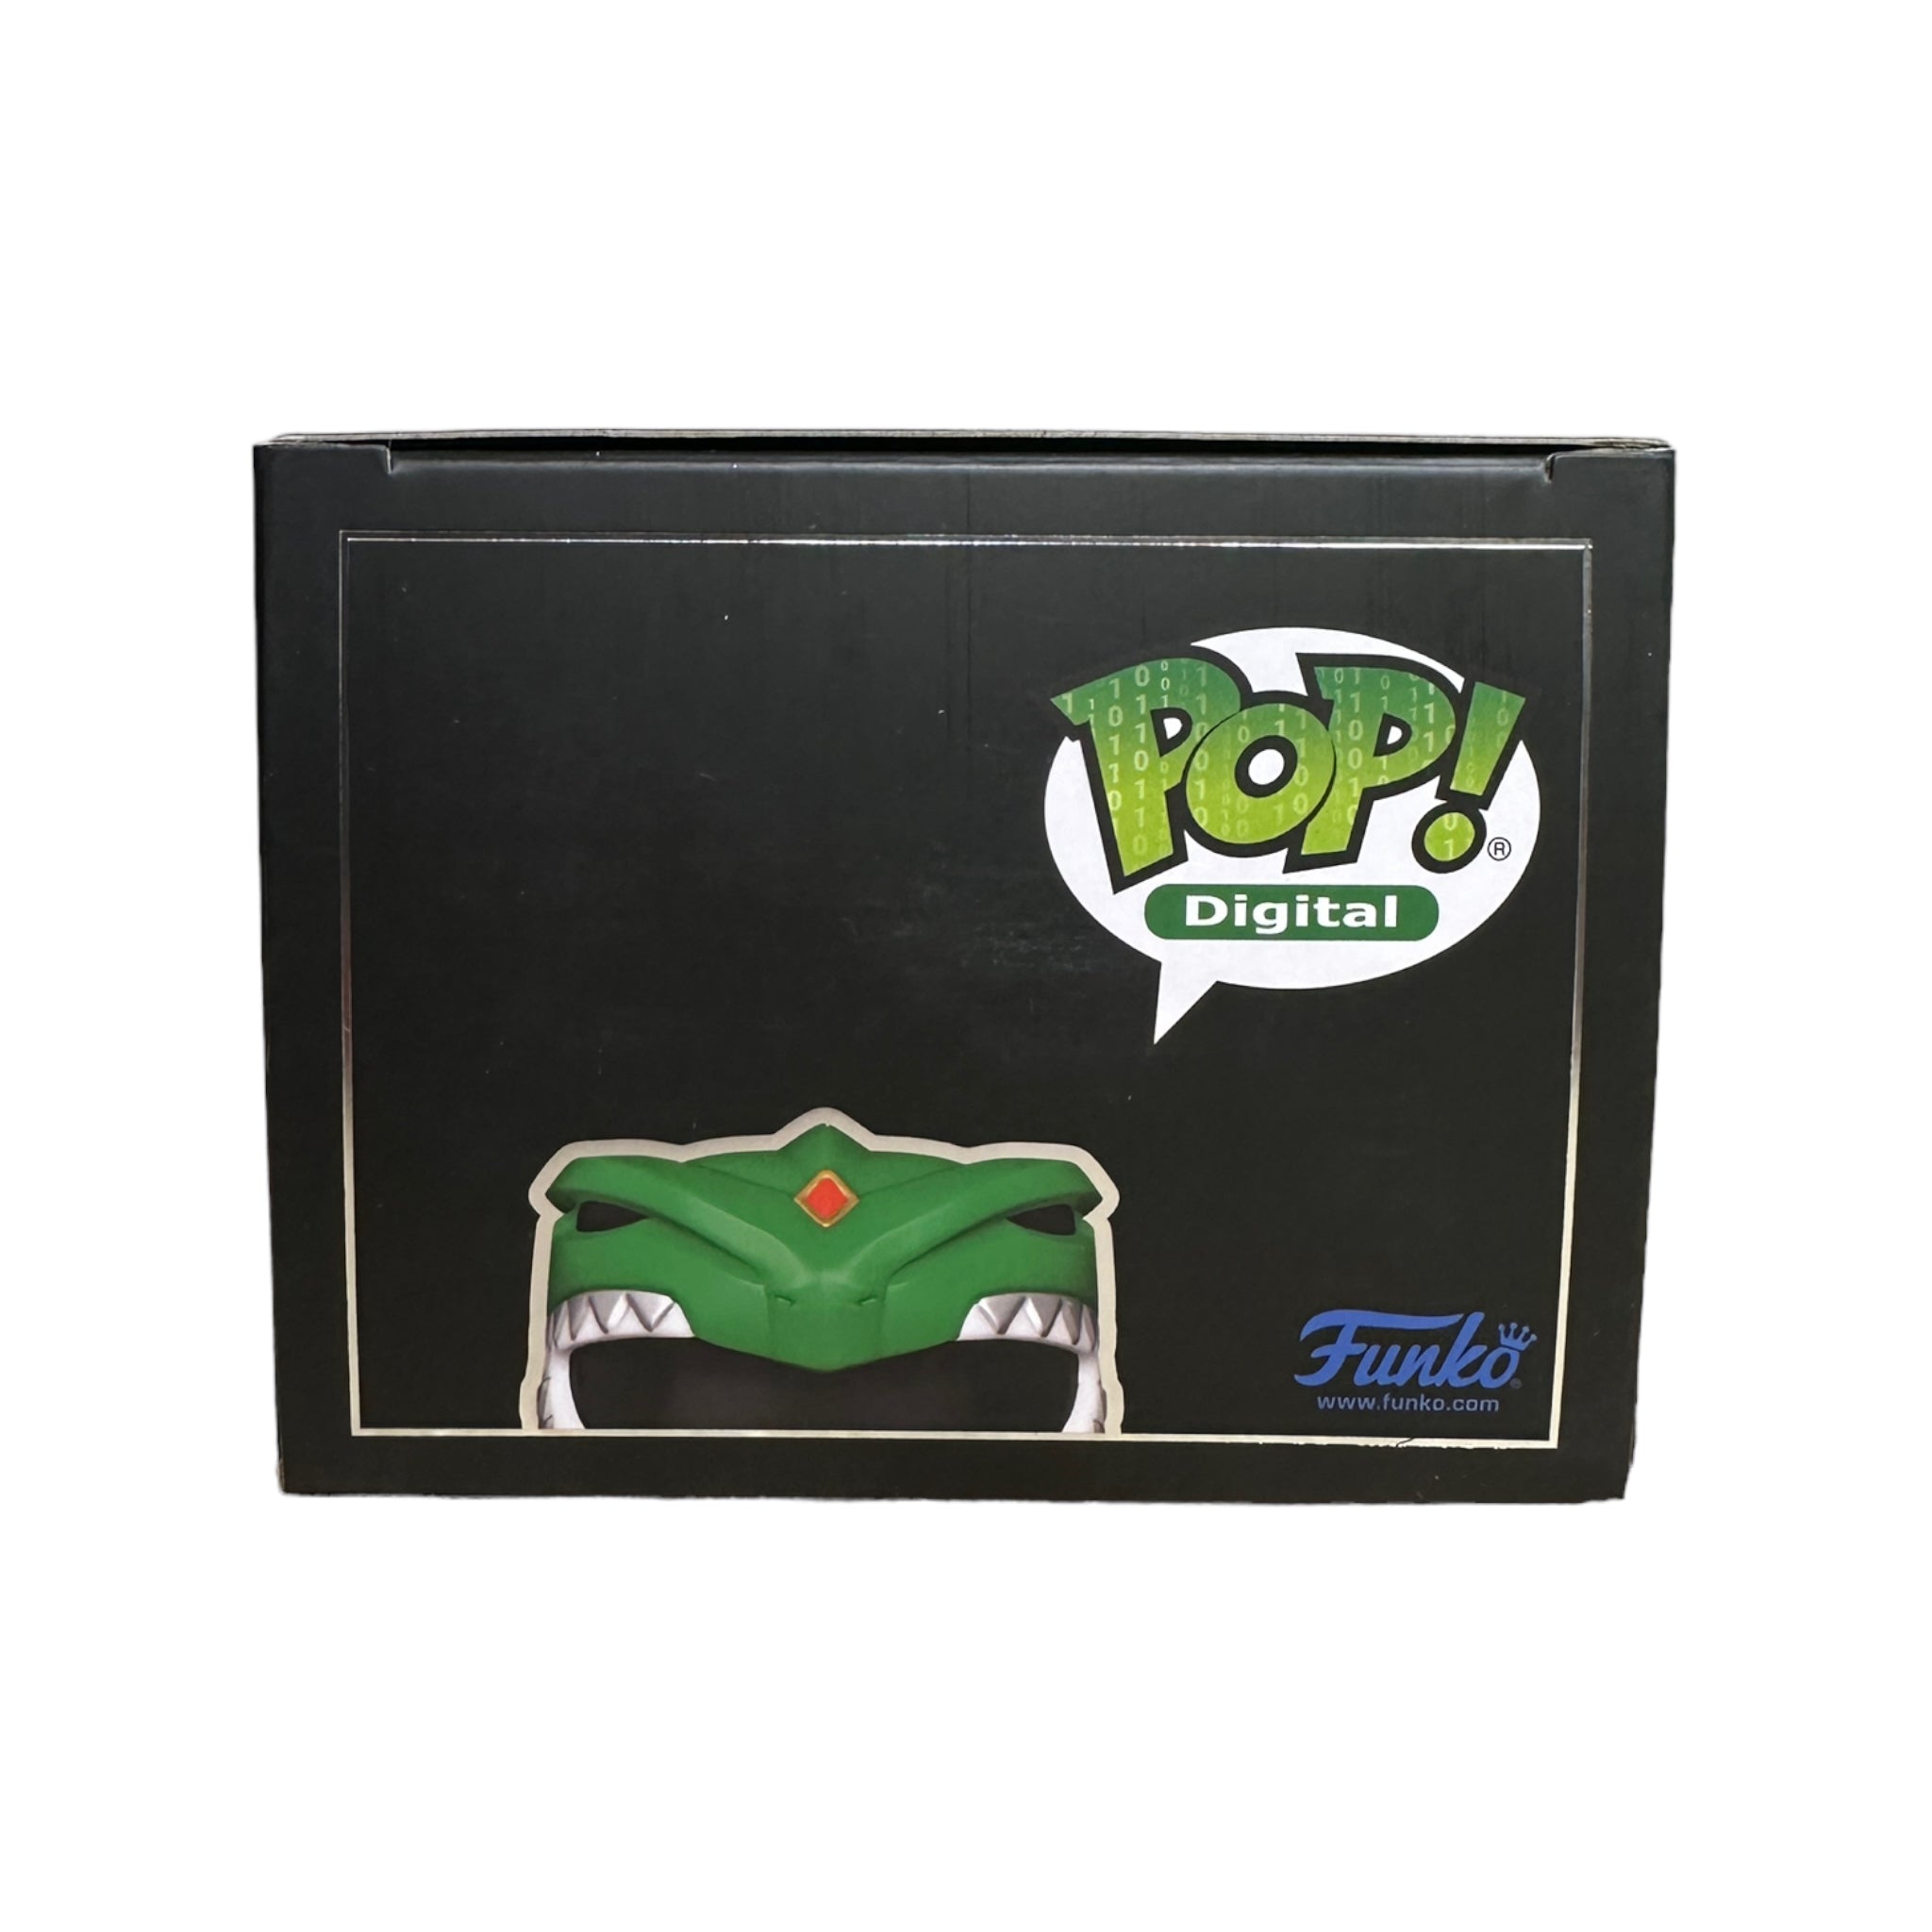 Green Ranger with Sword of Darkness #80 Funko Pop! - Mighty Morphin Power Rangers - NFT Release Exclusive LE999 Pcs - Condition 8.75/10